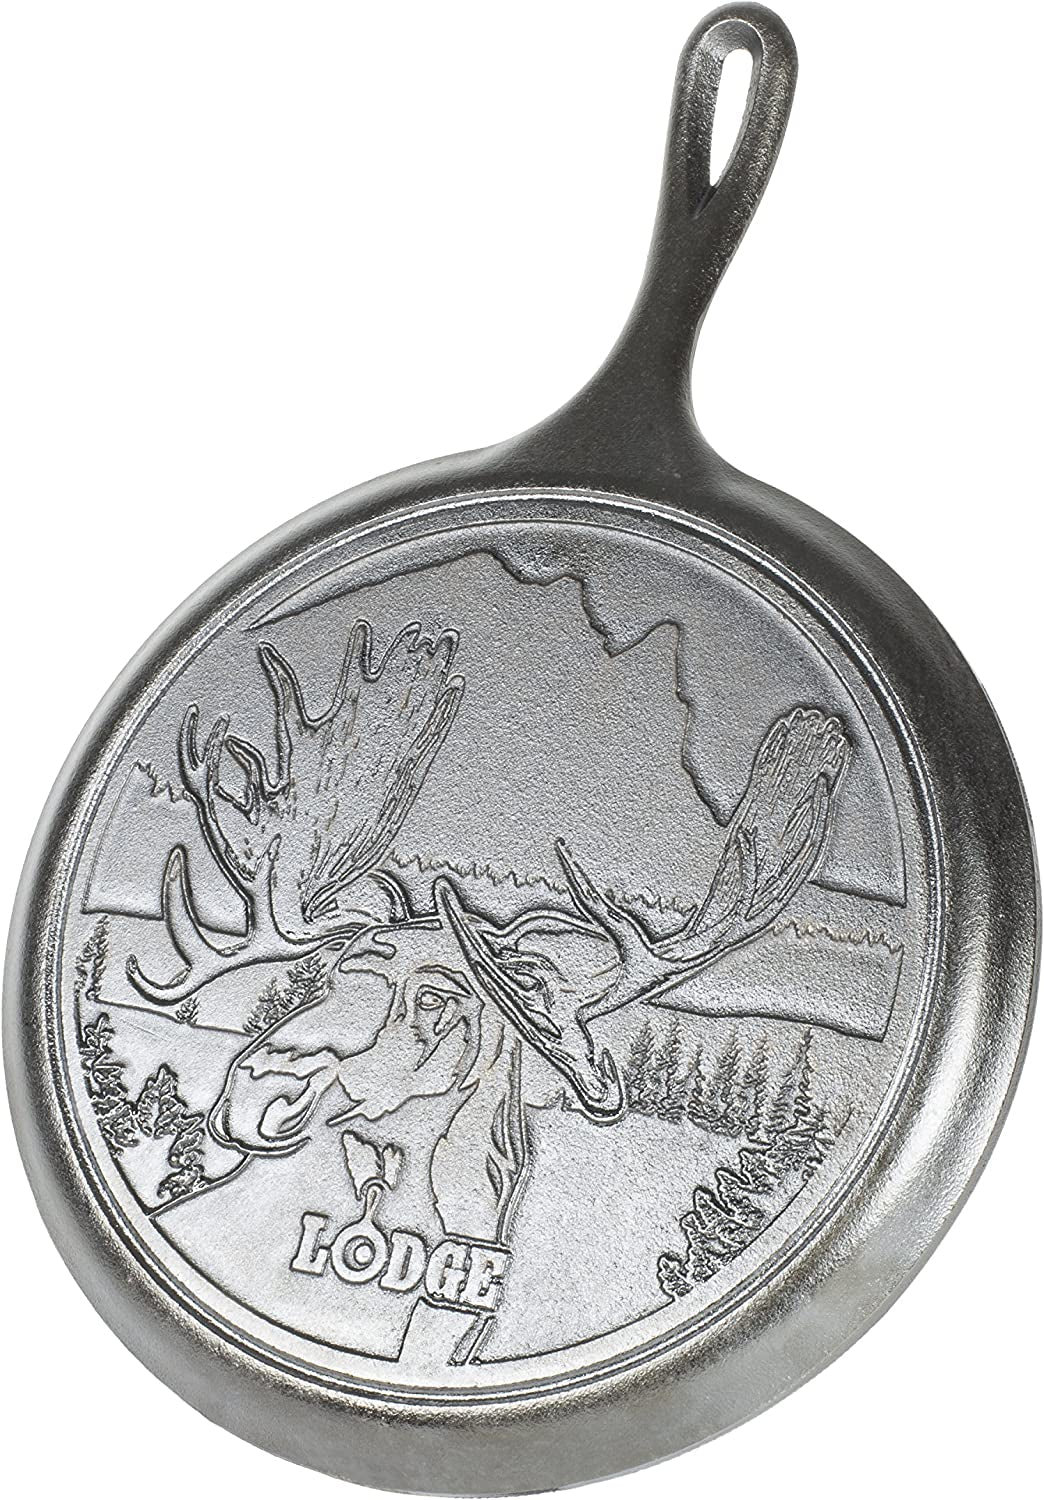 Lodge, Lodge L9OGWLMO 10.5 Inch Cast Iron Griddle with Moose Scene, Black